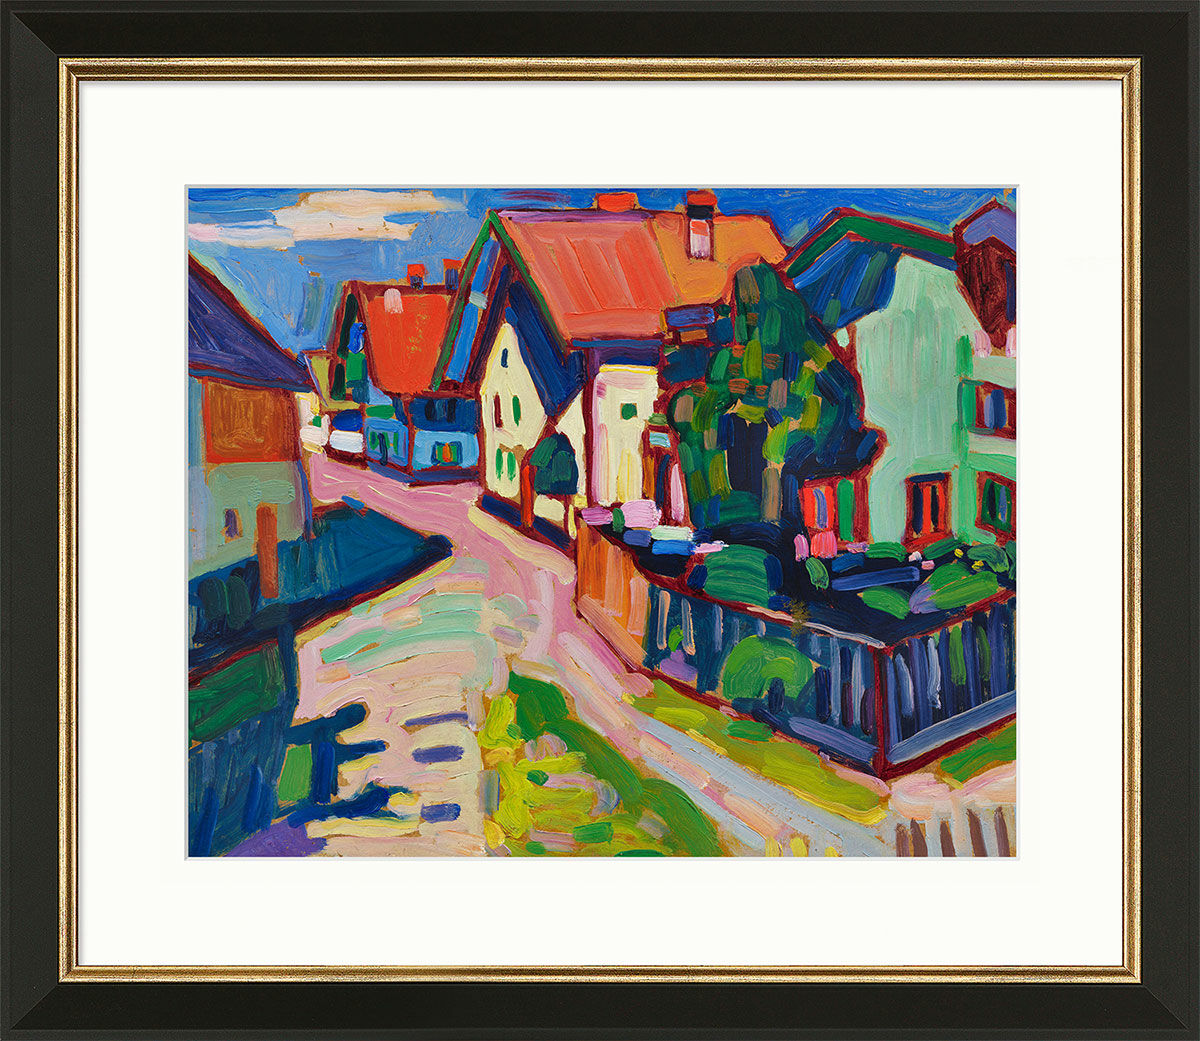 Picture "Murnau" (1908), black and golden framed version by Wassily Kandinsky